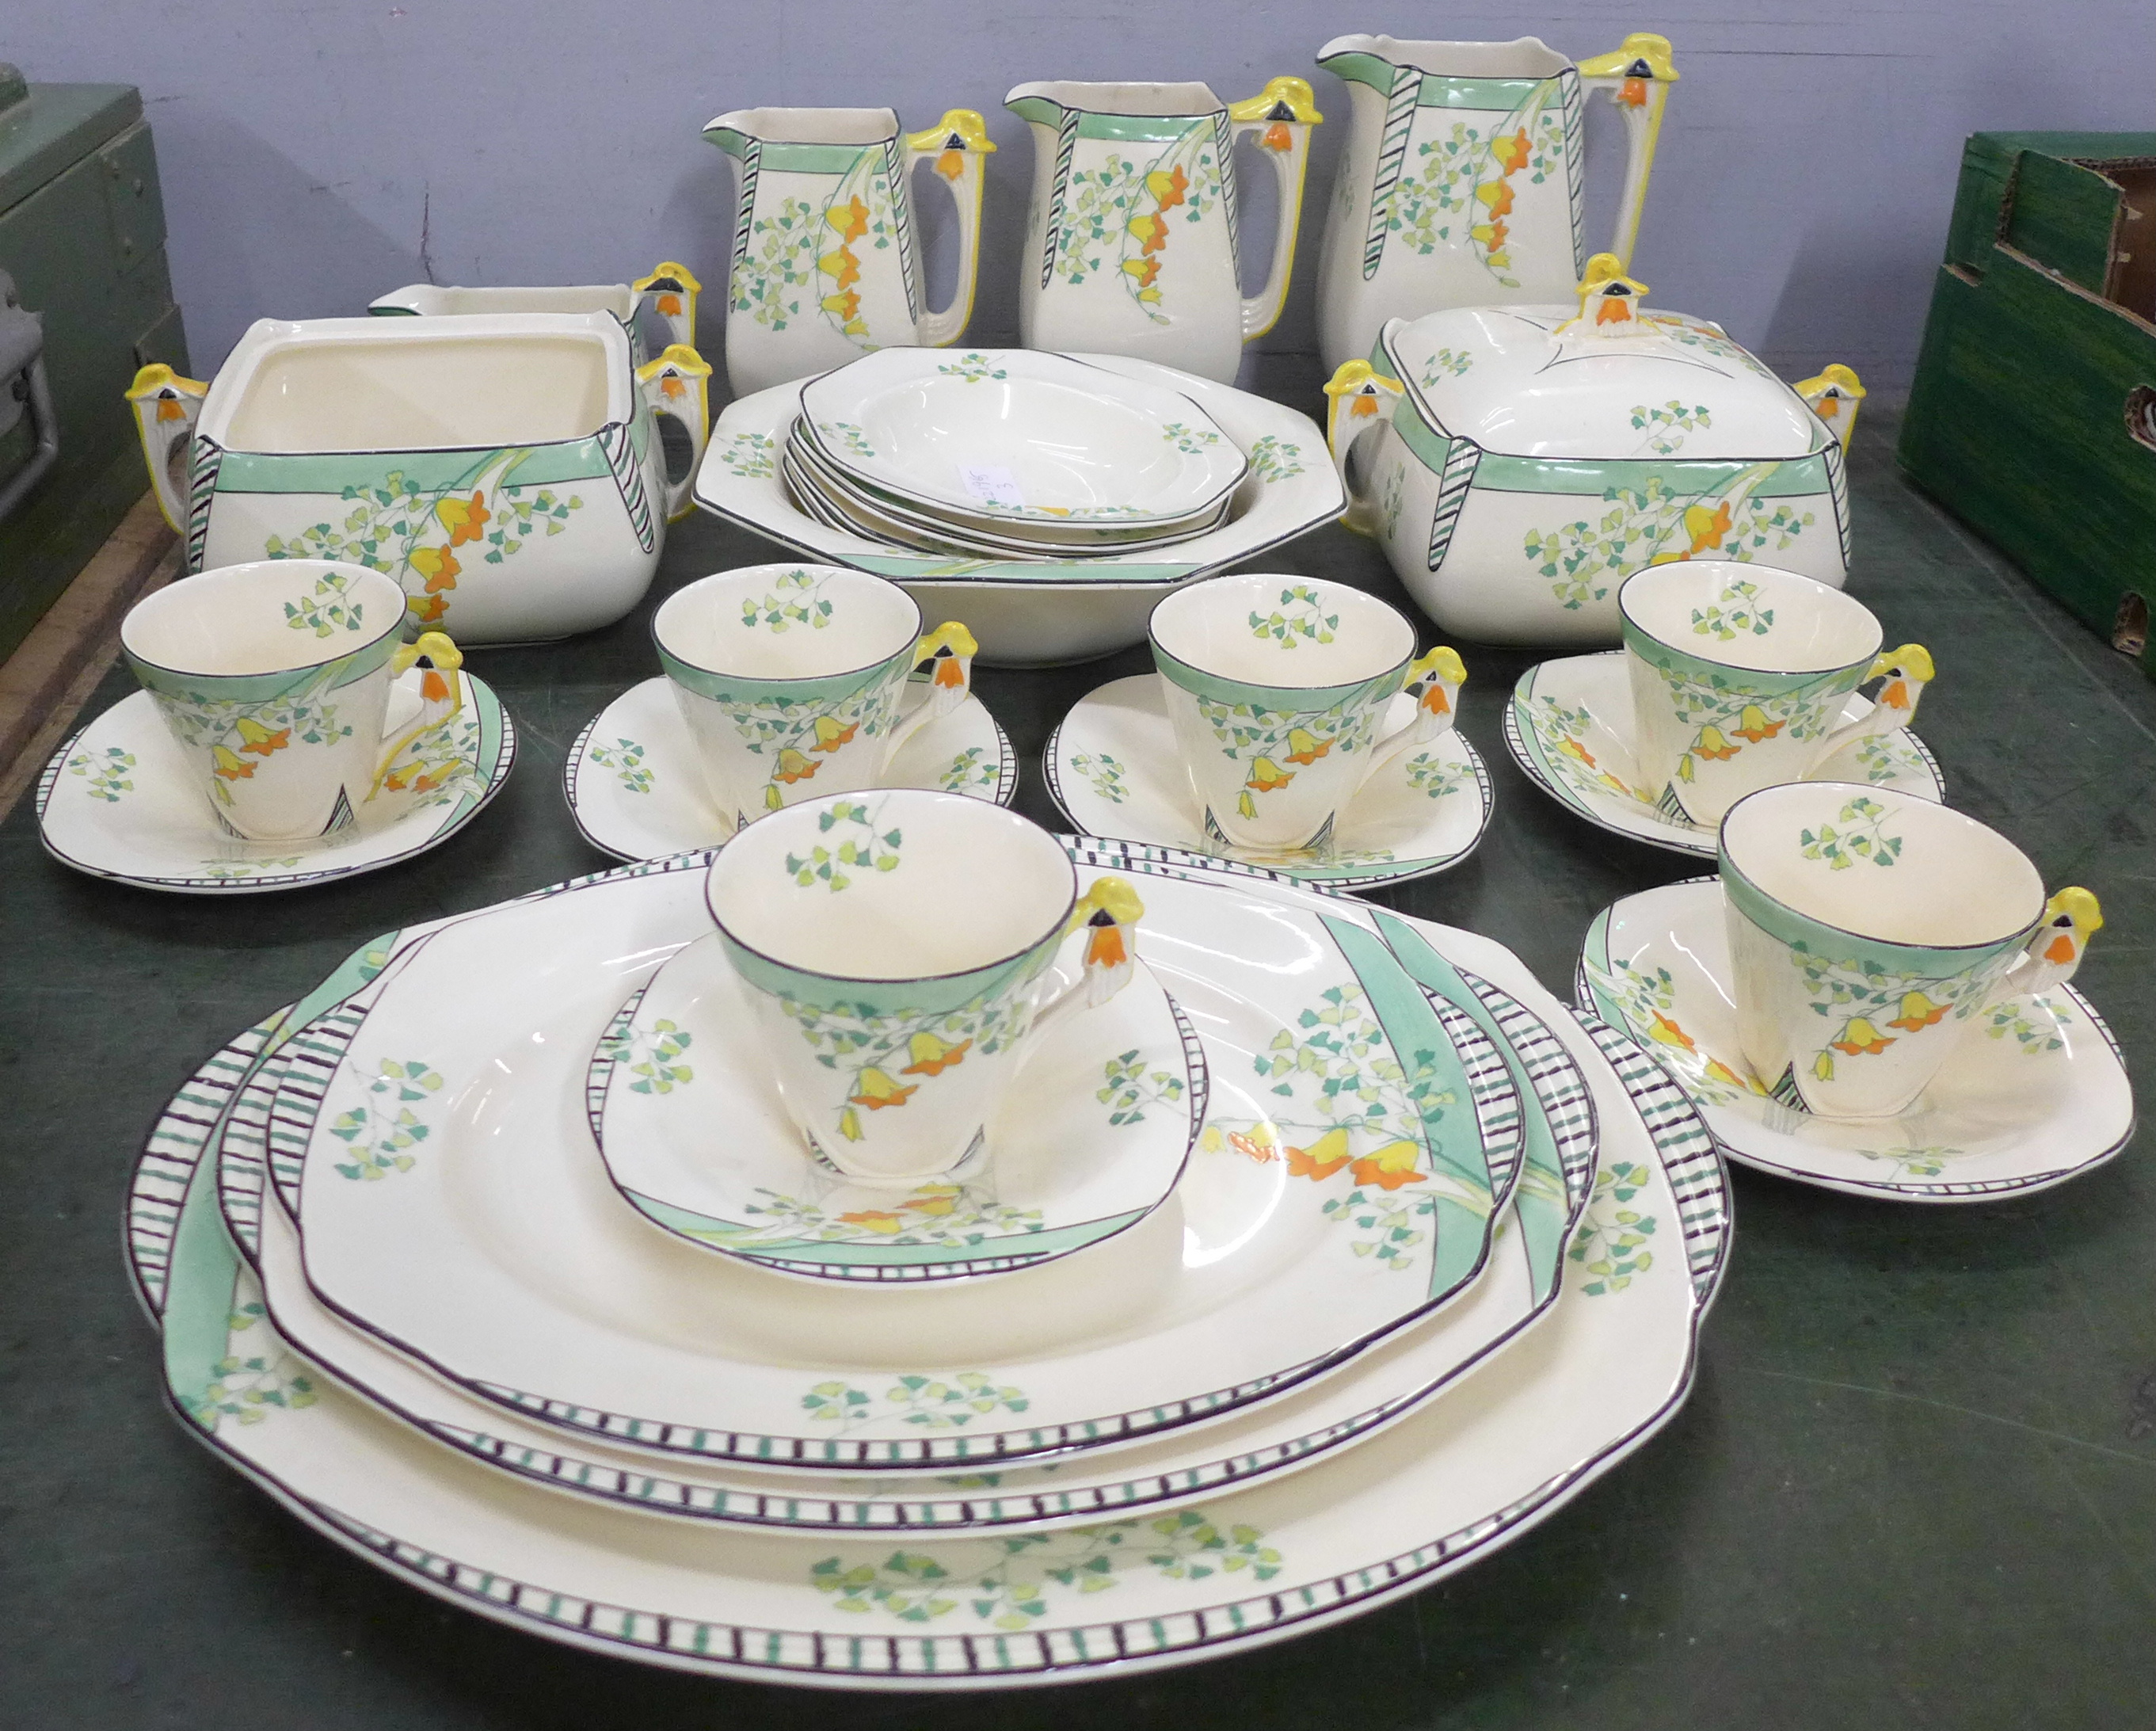 Burleighware Evergreen Art Deco set of six cups and saucers, two vegetable dishes, one lacking